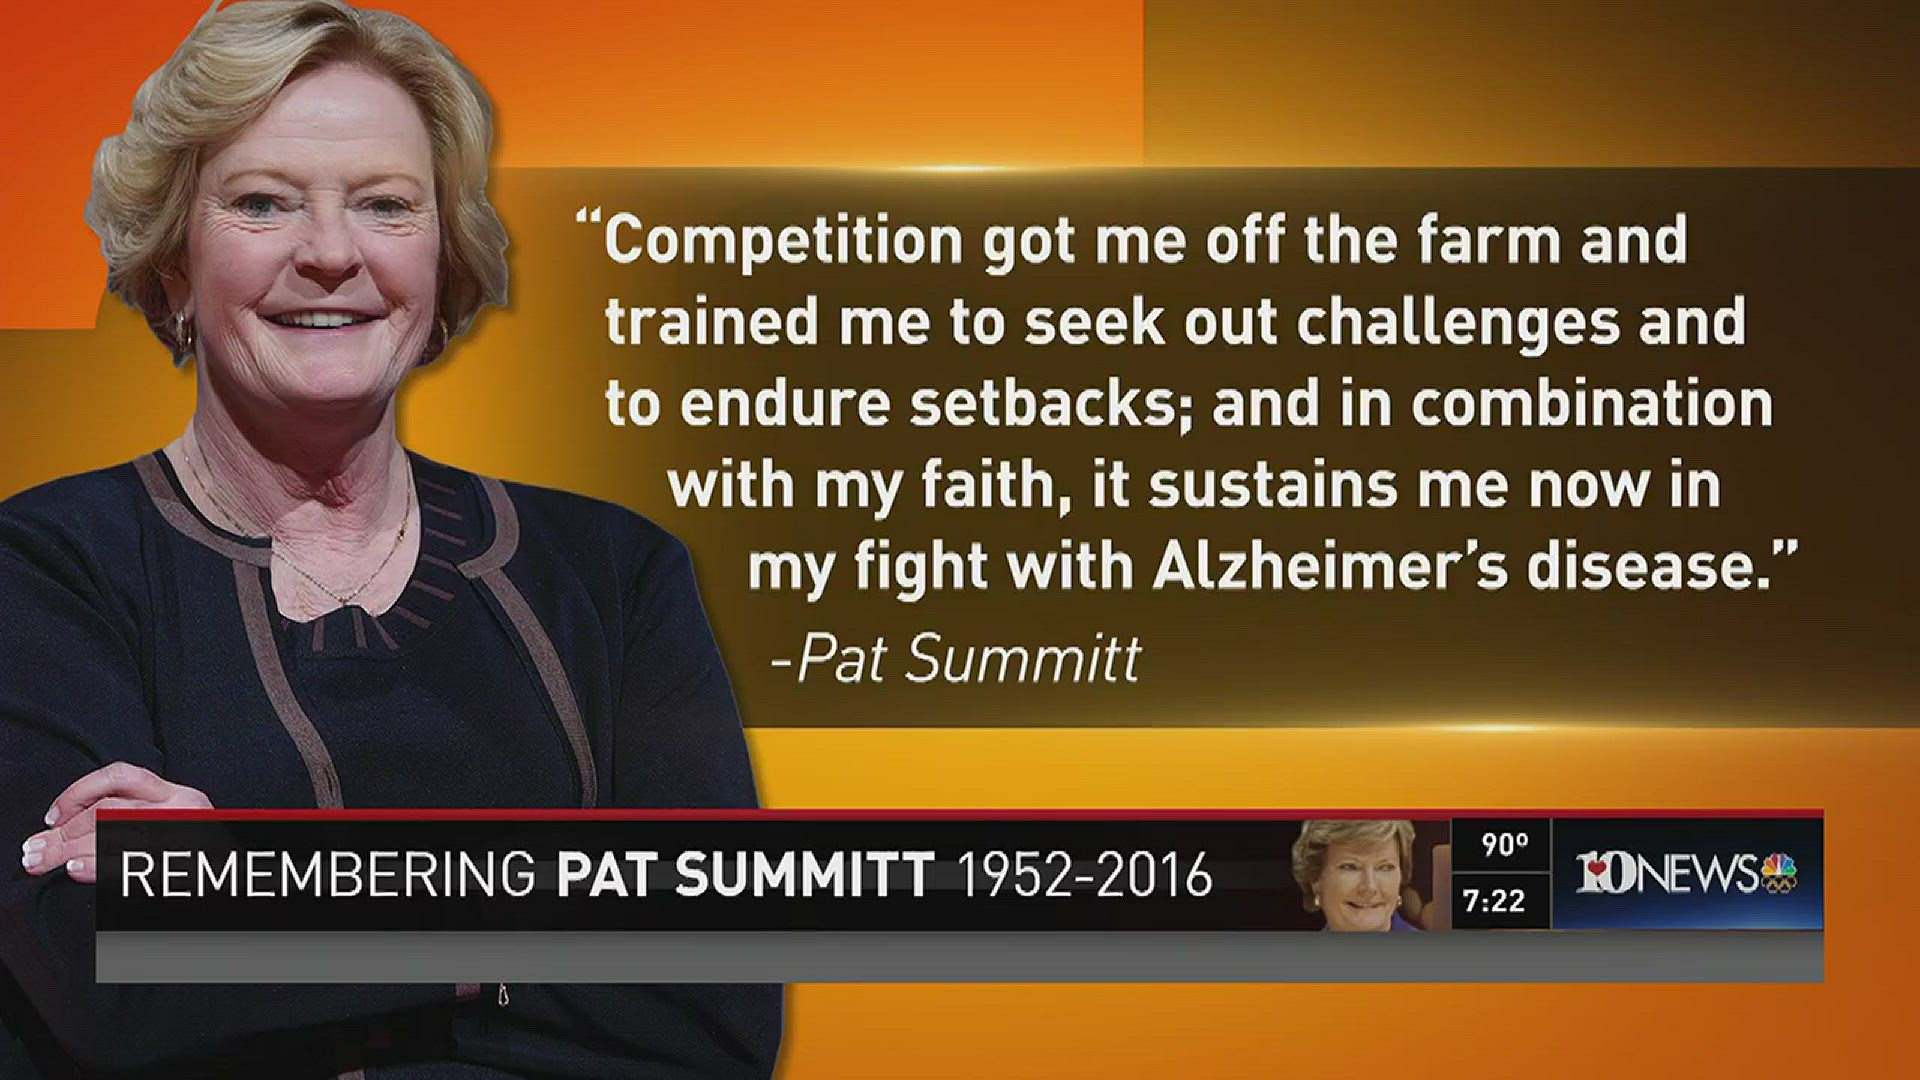 Holly Warwick, the Lady Vol's head coach, shares her memories of Pat.